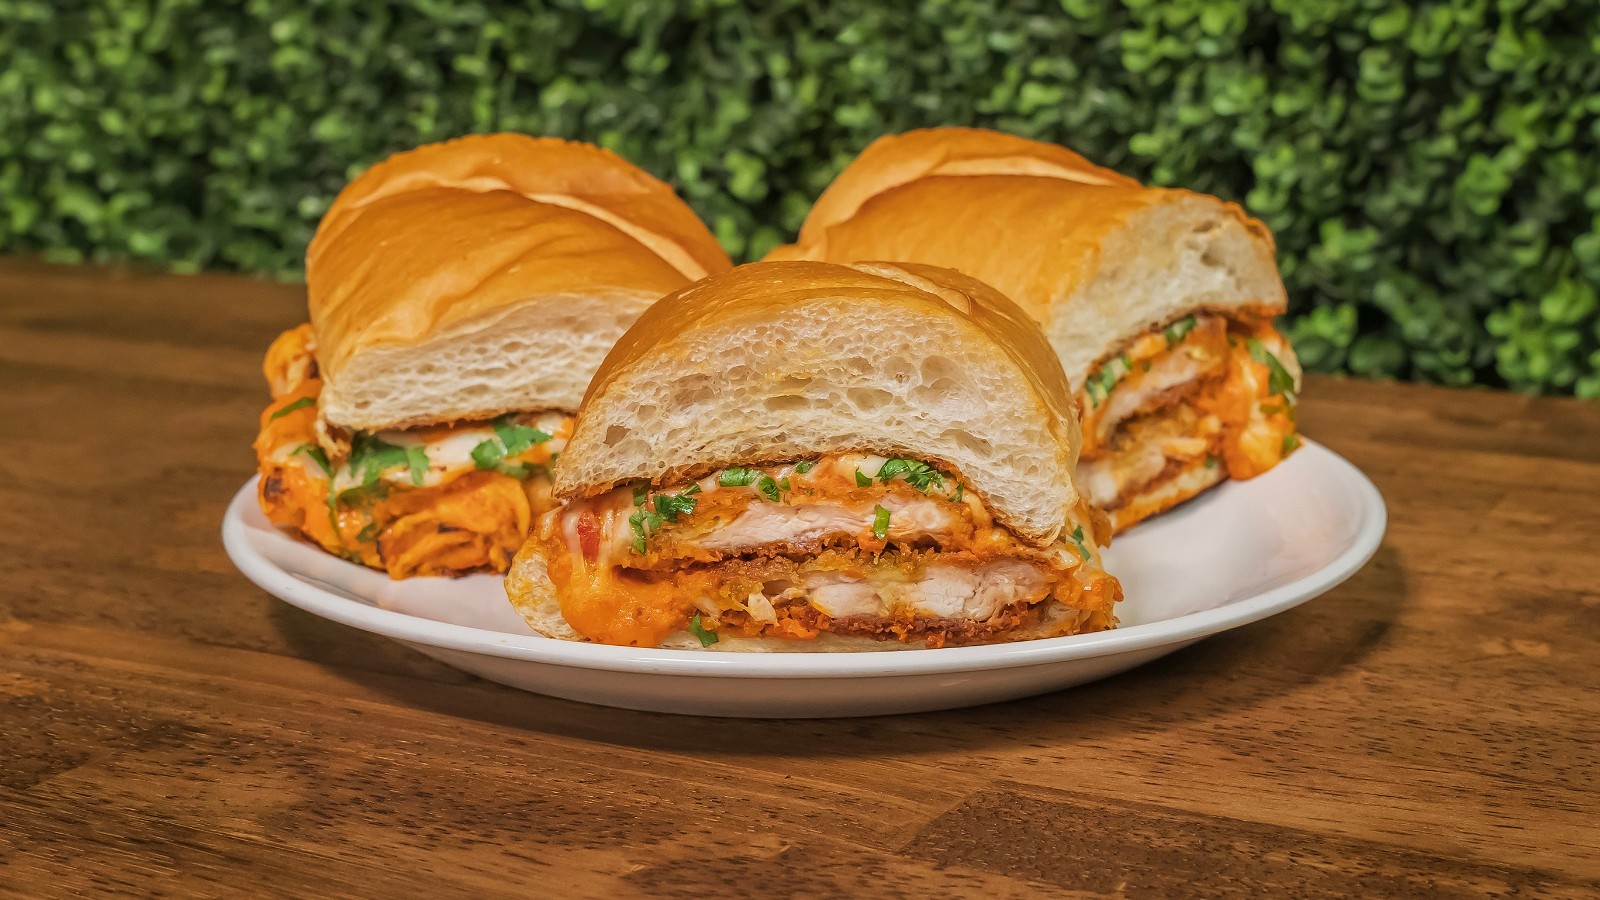 Image of Feed 4 for $20 Vodka Sauce Chicken Sandwich